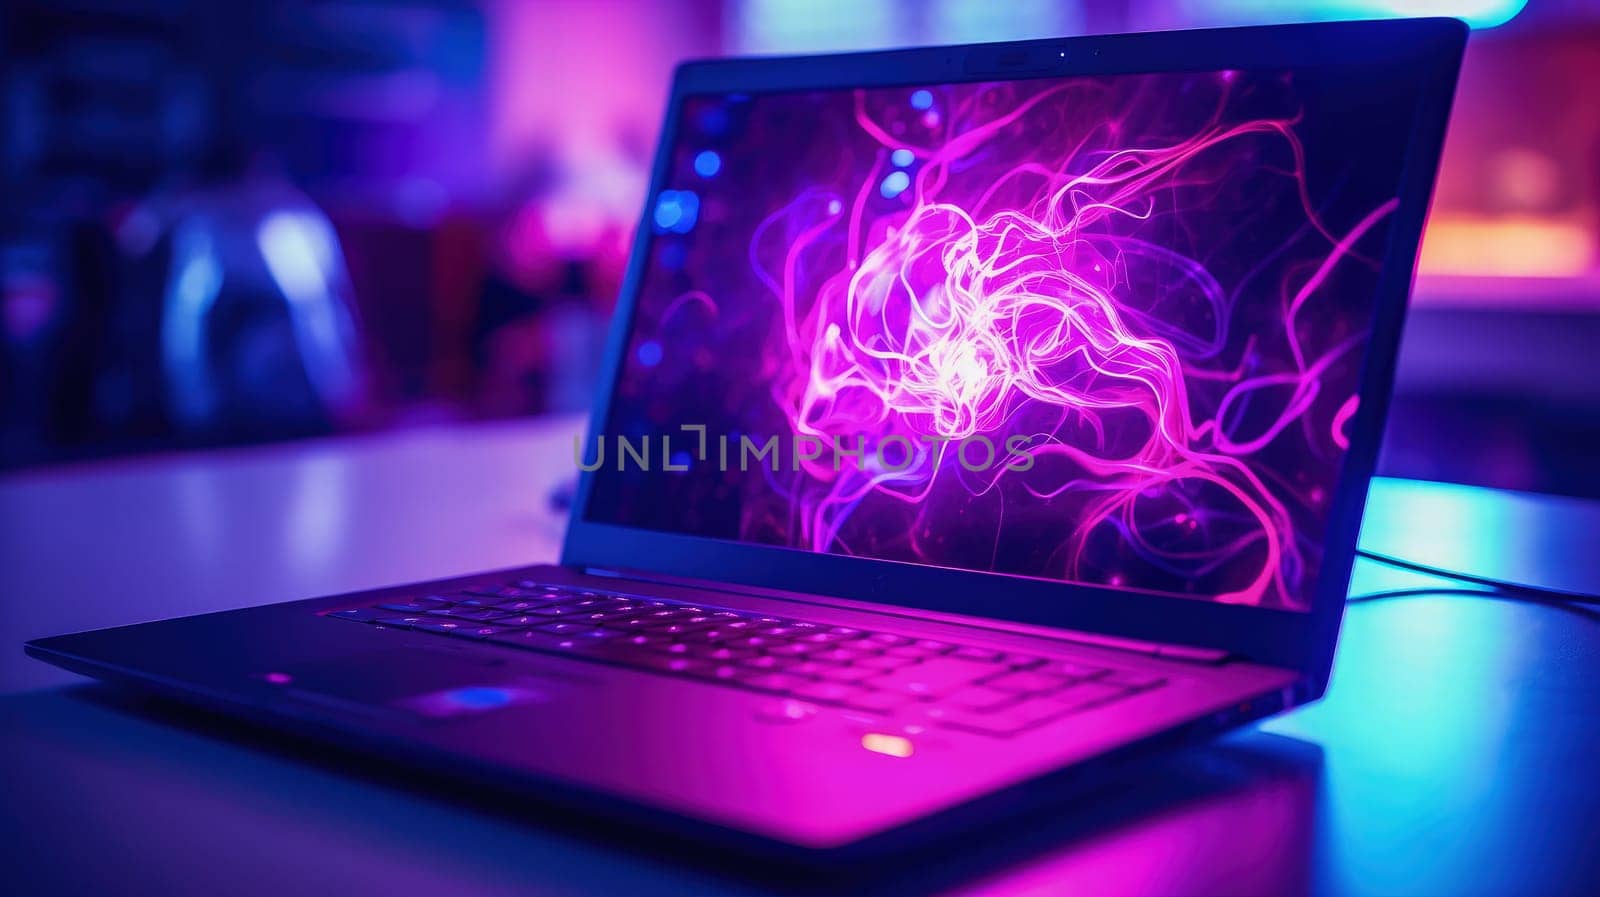 Neurons on a laptop screen in a purple neon room. The concept of artificial intelligence development. High quality photo